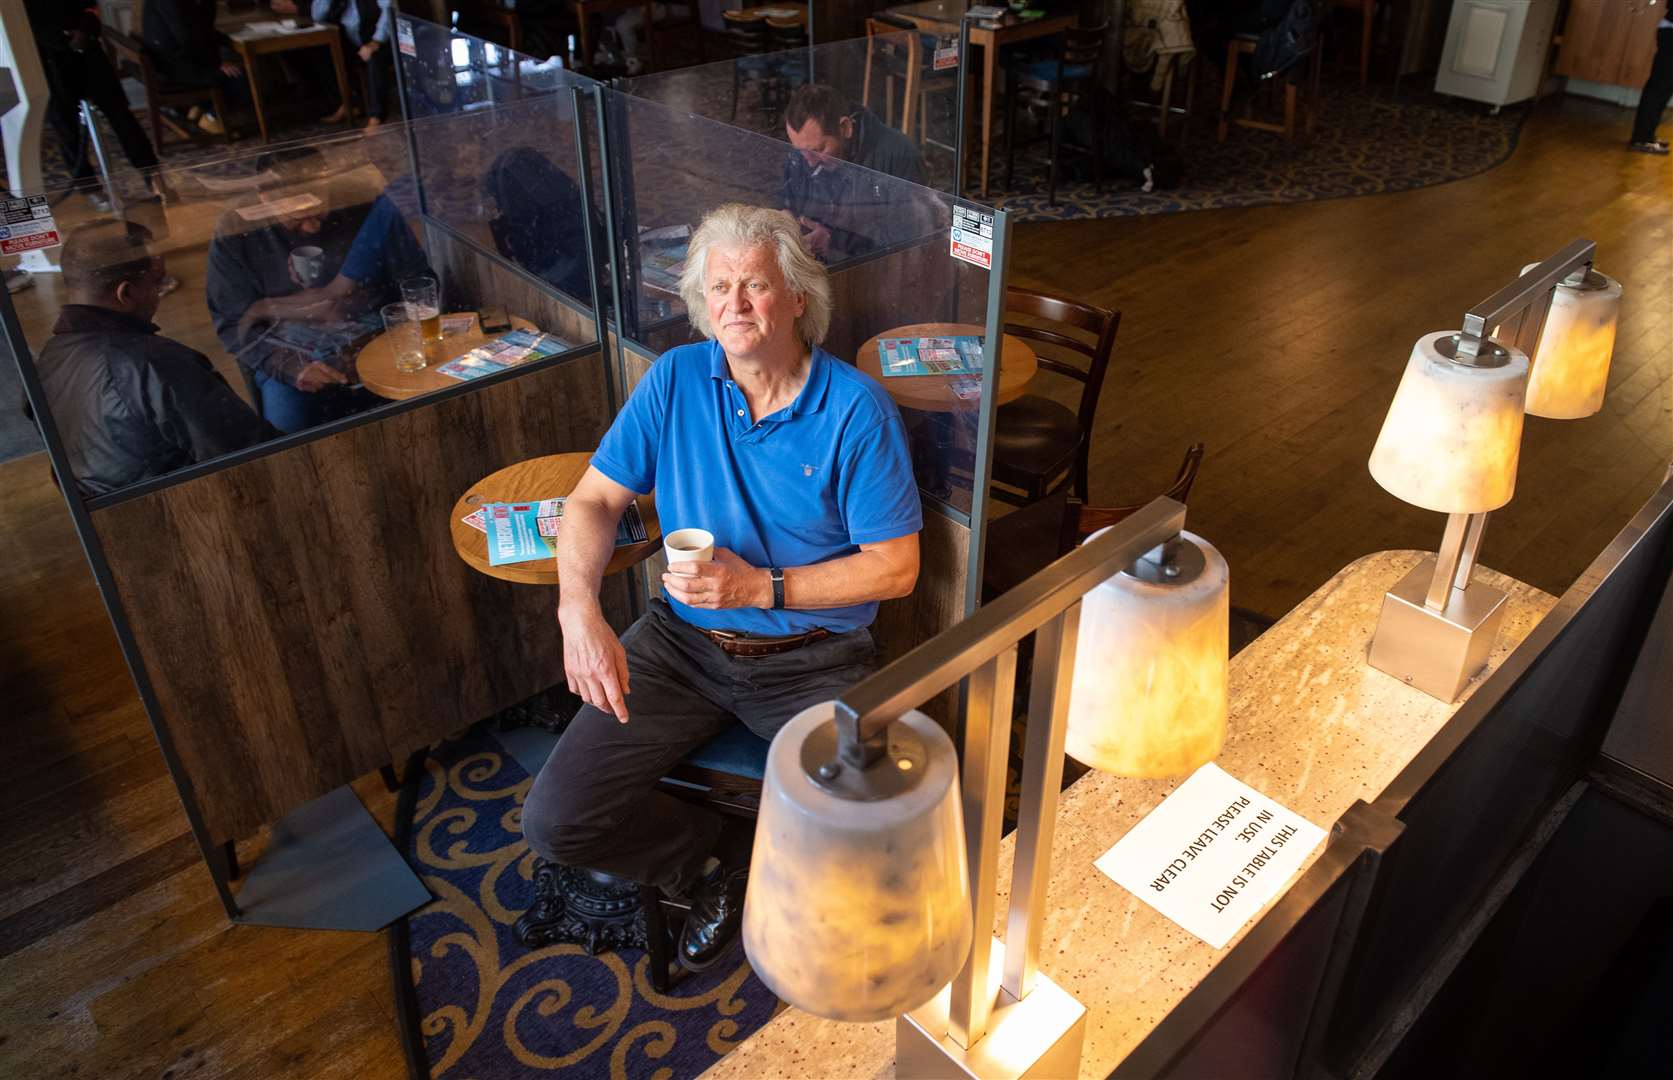 Chairman Tim Martin said Wetherspoons pubs are known for their value-for-money prices (Dominic Lipinski/PA)